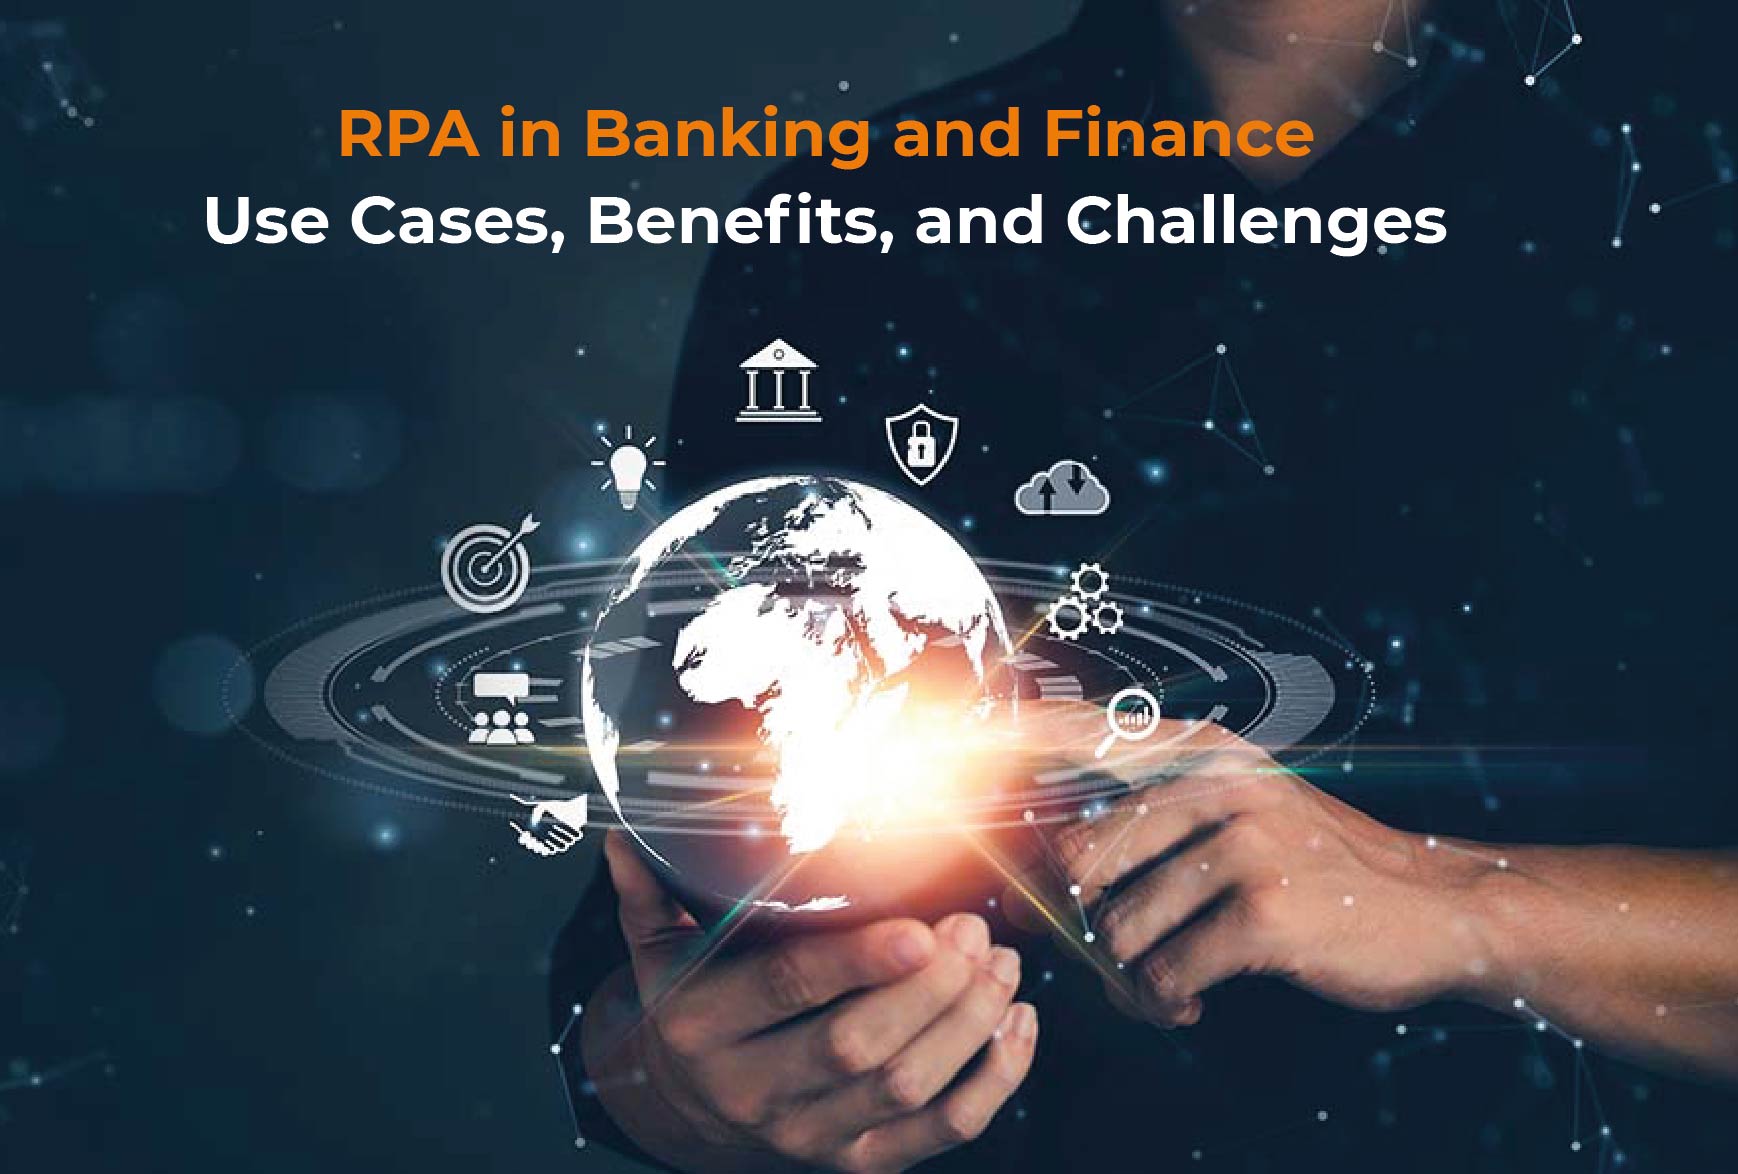 RPA in Banking and Finance Use Cases, Benefits, and Challenges